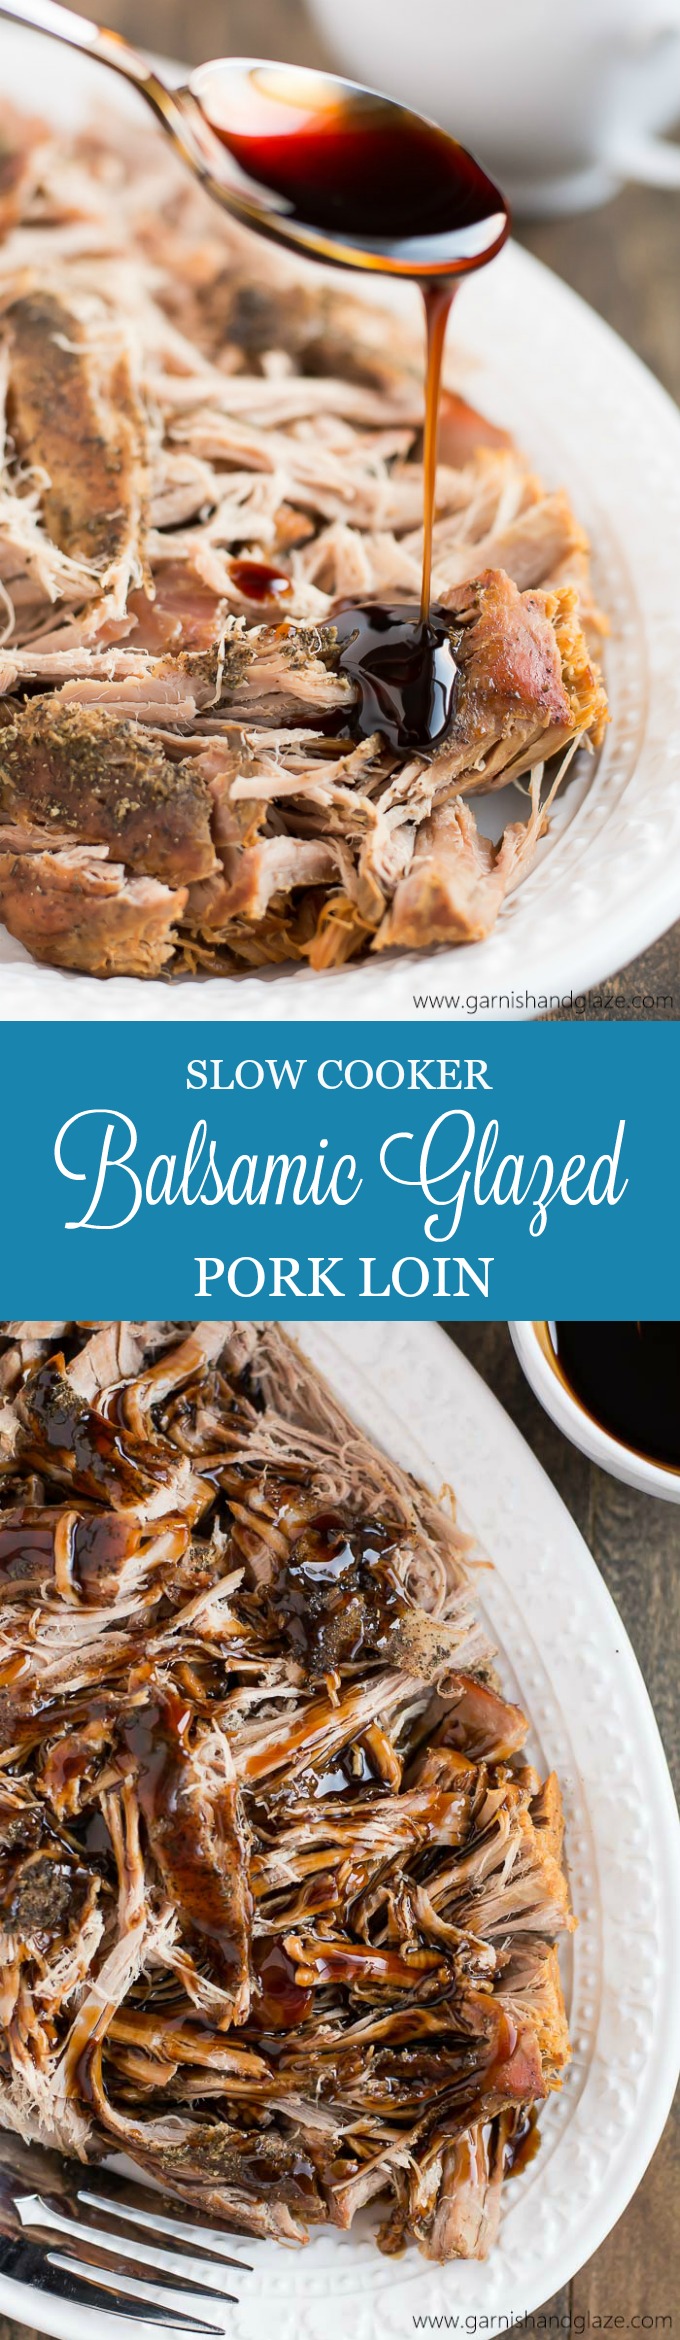 Impress your guests at your next dinner party with this flavorful Balsamic Glazed Slow Cooker Pork Loin that requires almost no effort.